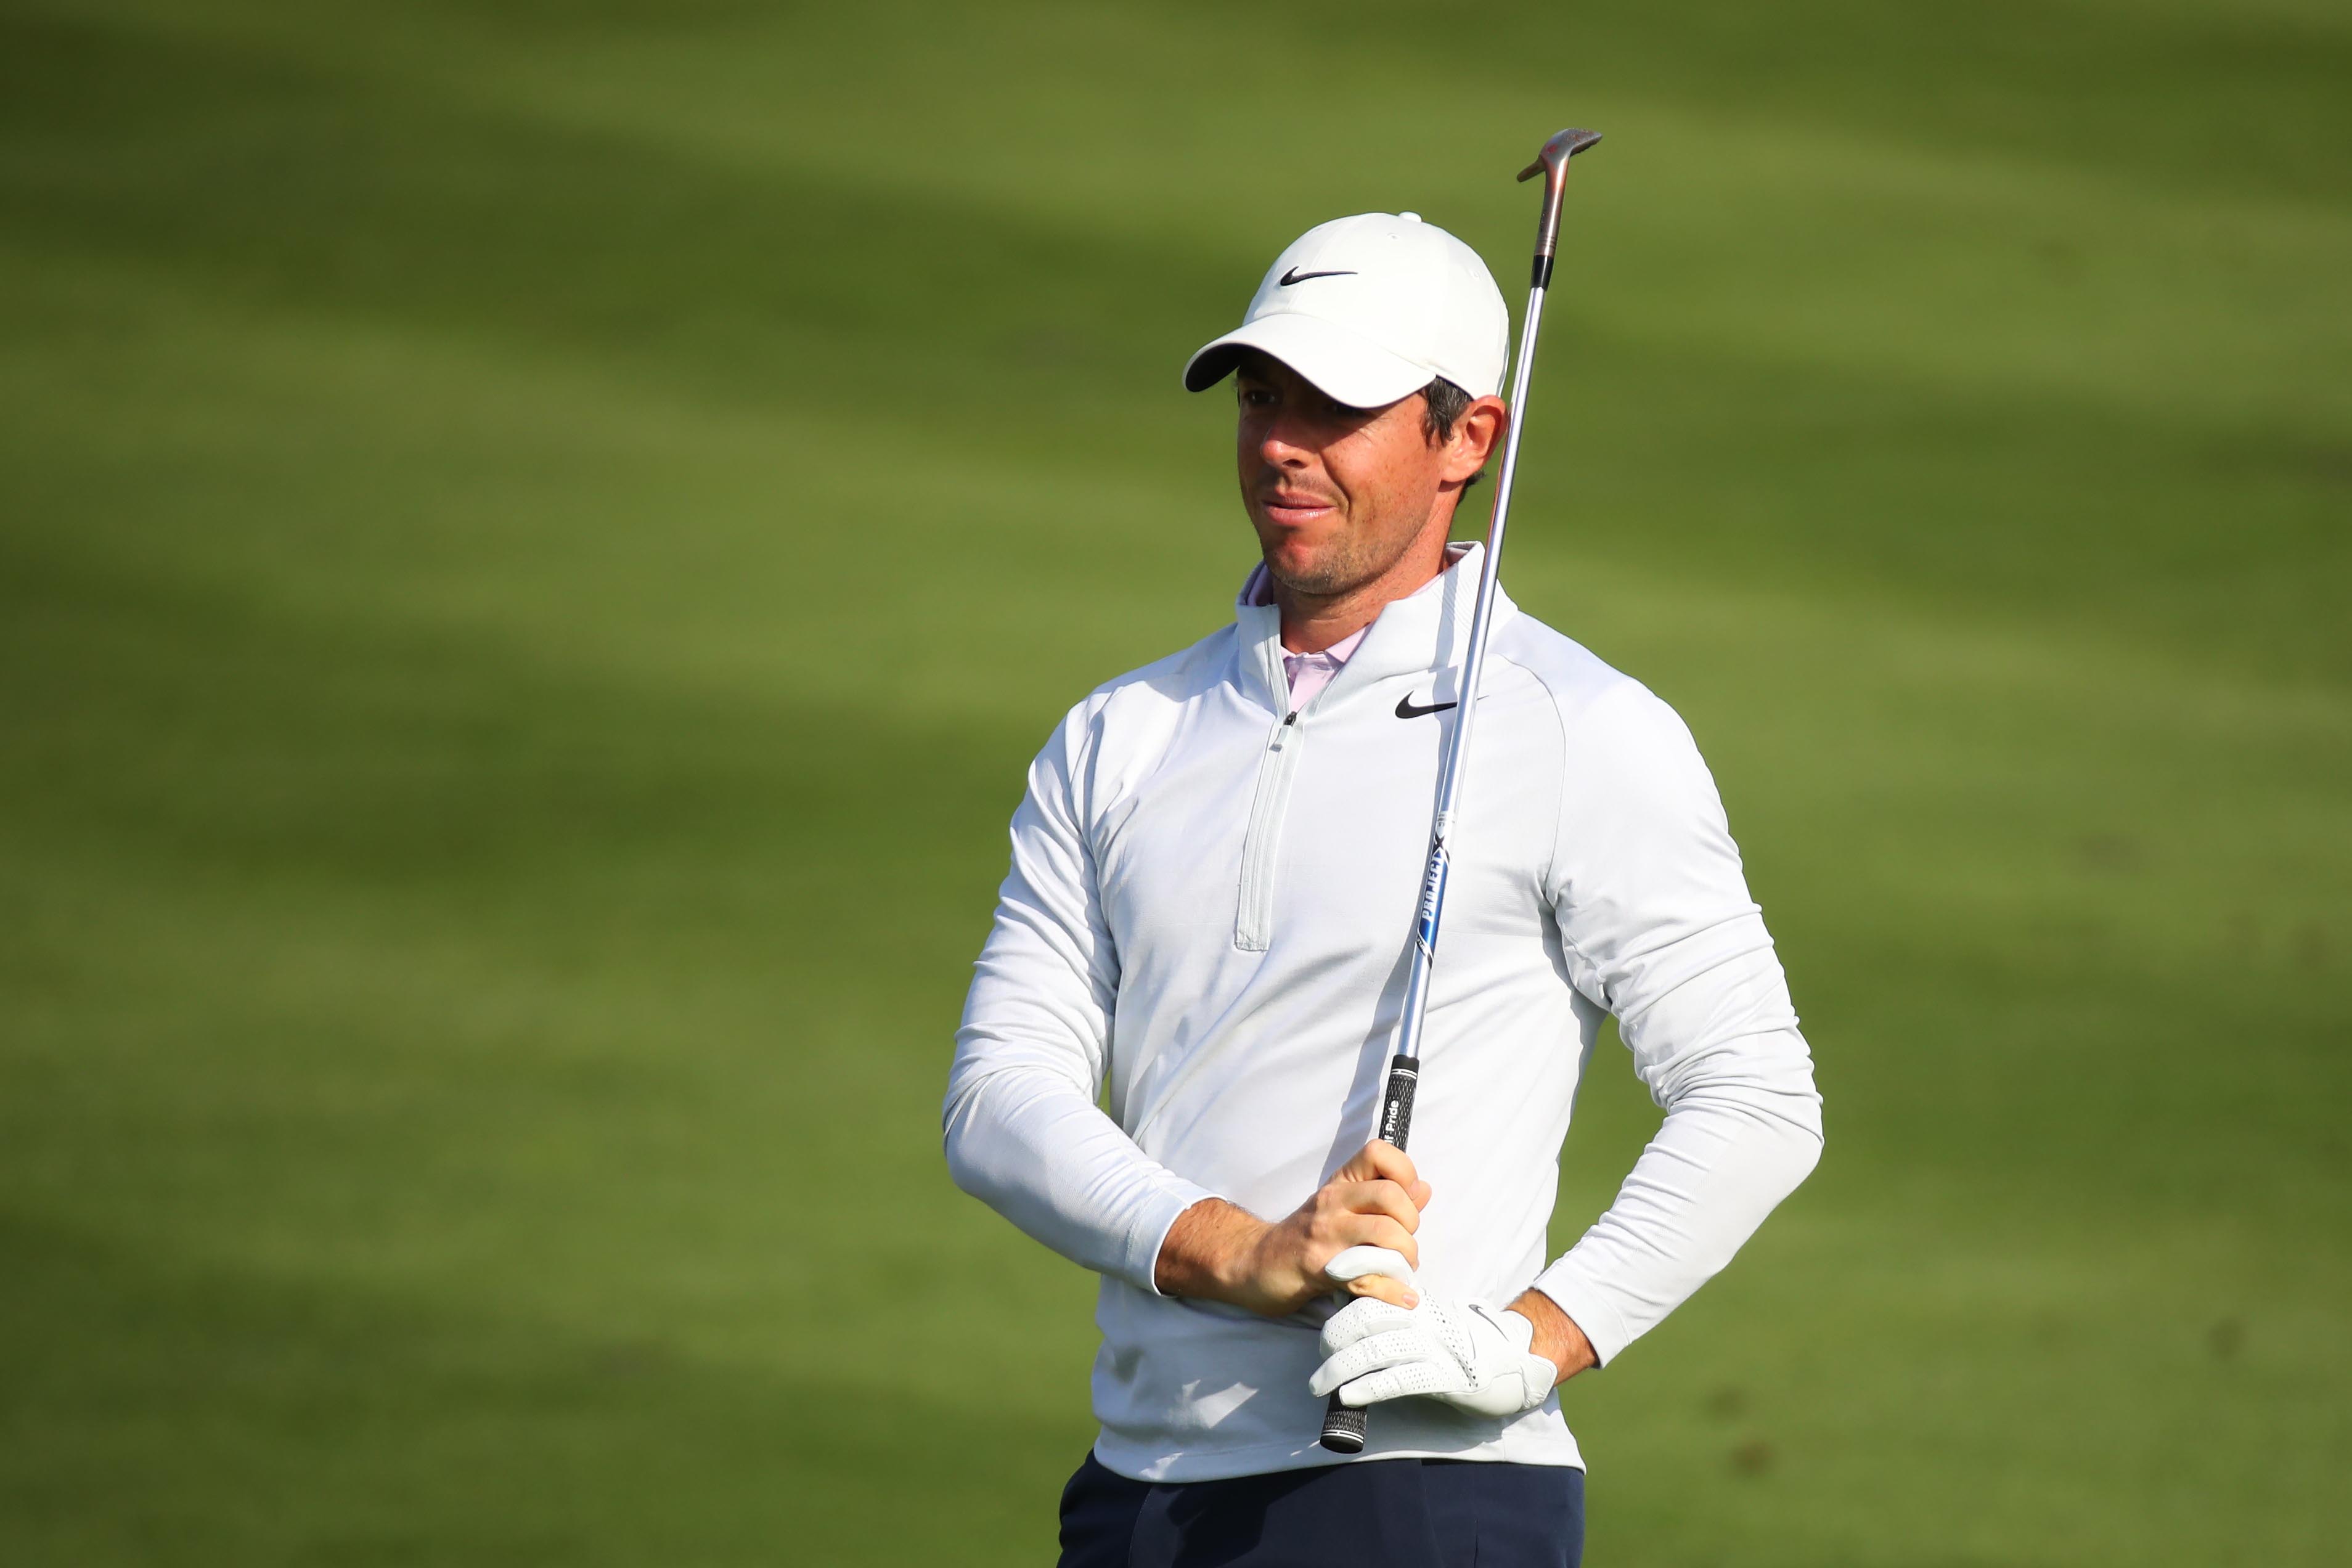 Rory McIlroy ended a year-long drought at the Players Championship.